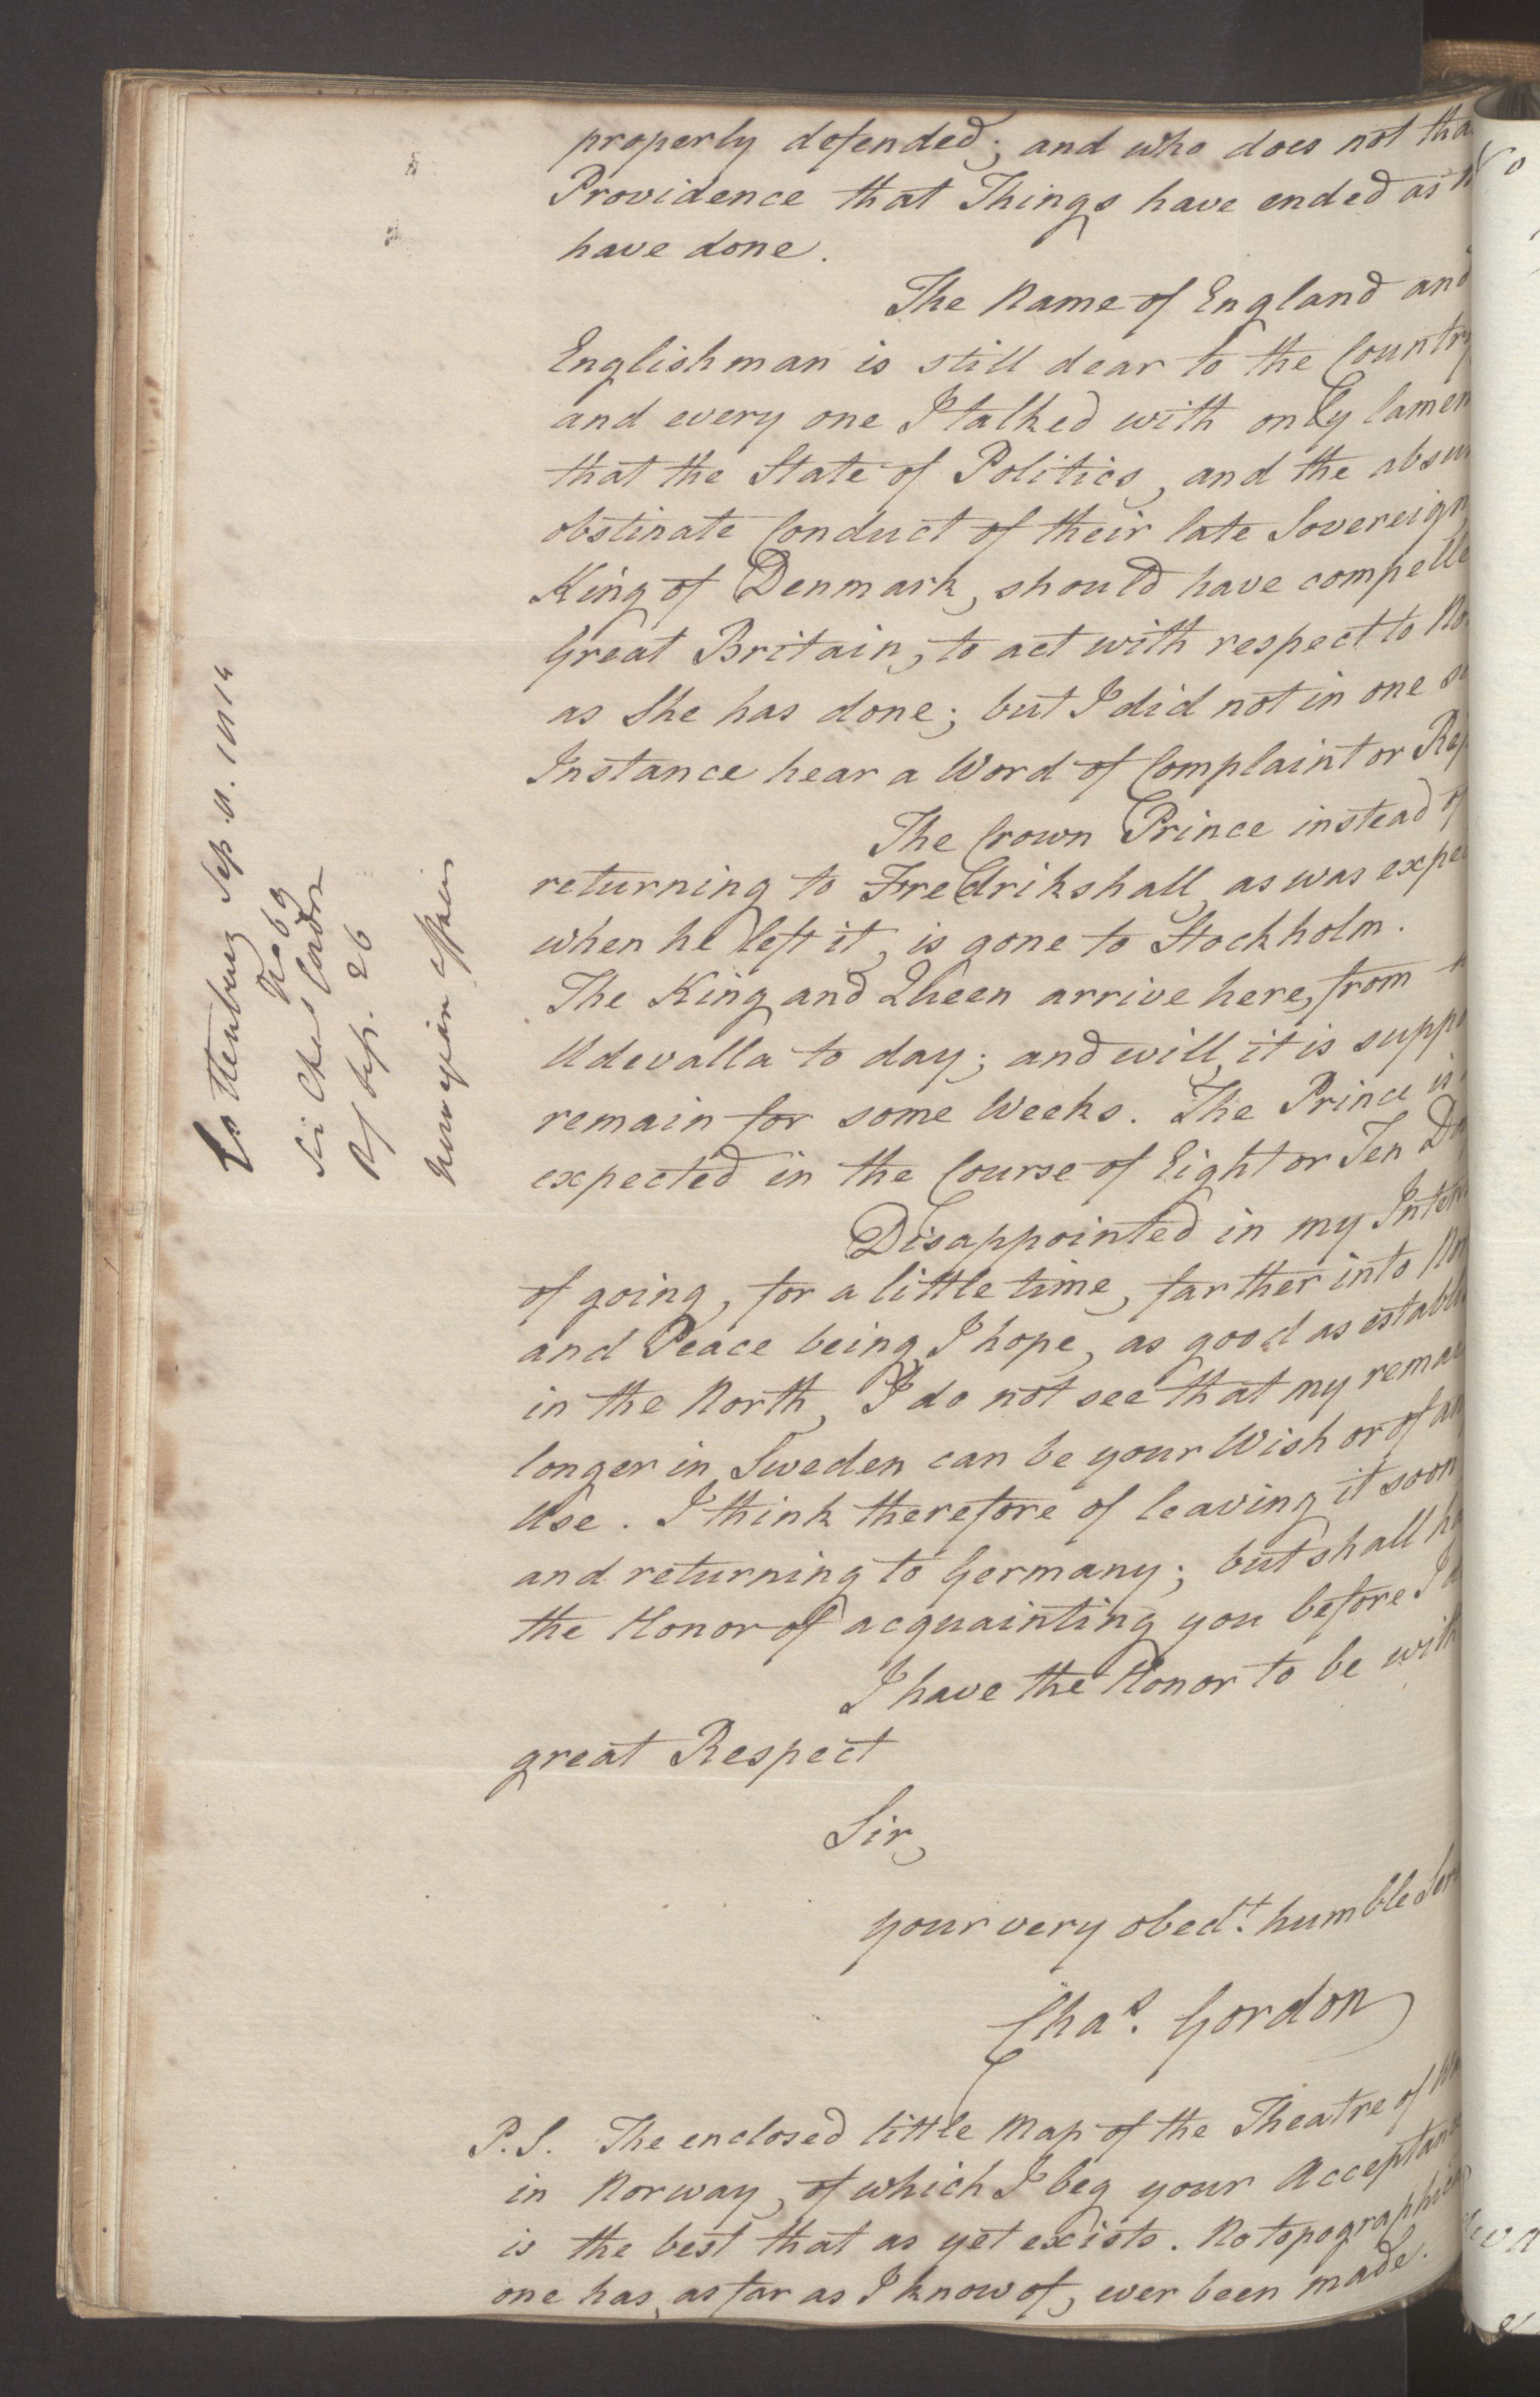 Foreign Office*, UKA/-/FO 38/16: Sir C. Gordon. Reports from Malmö, Jonkoping, and Helsingborg, 1814, p. 110